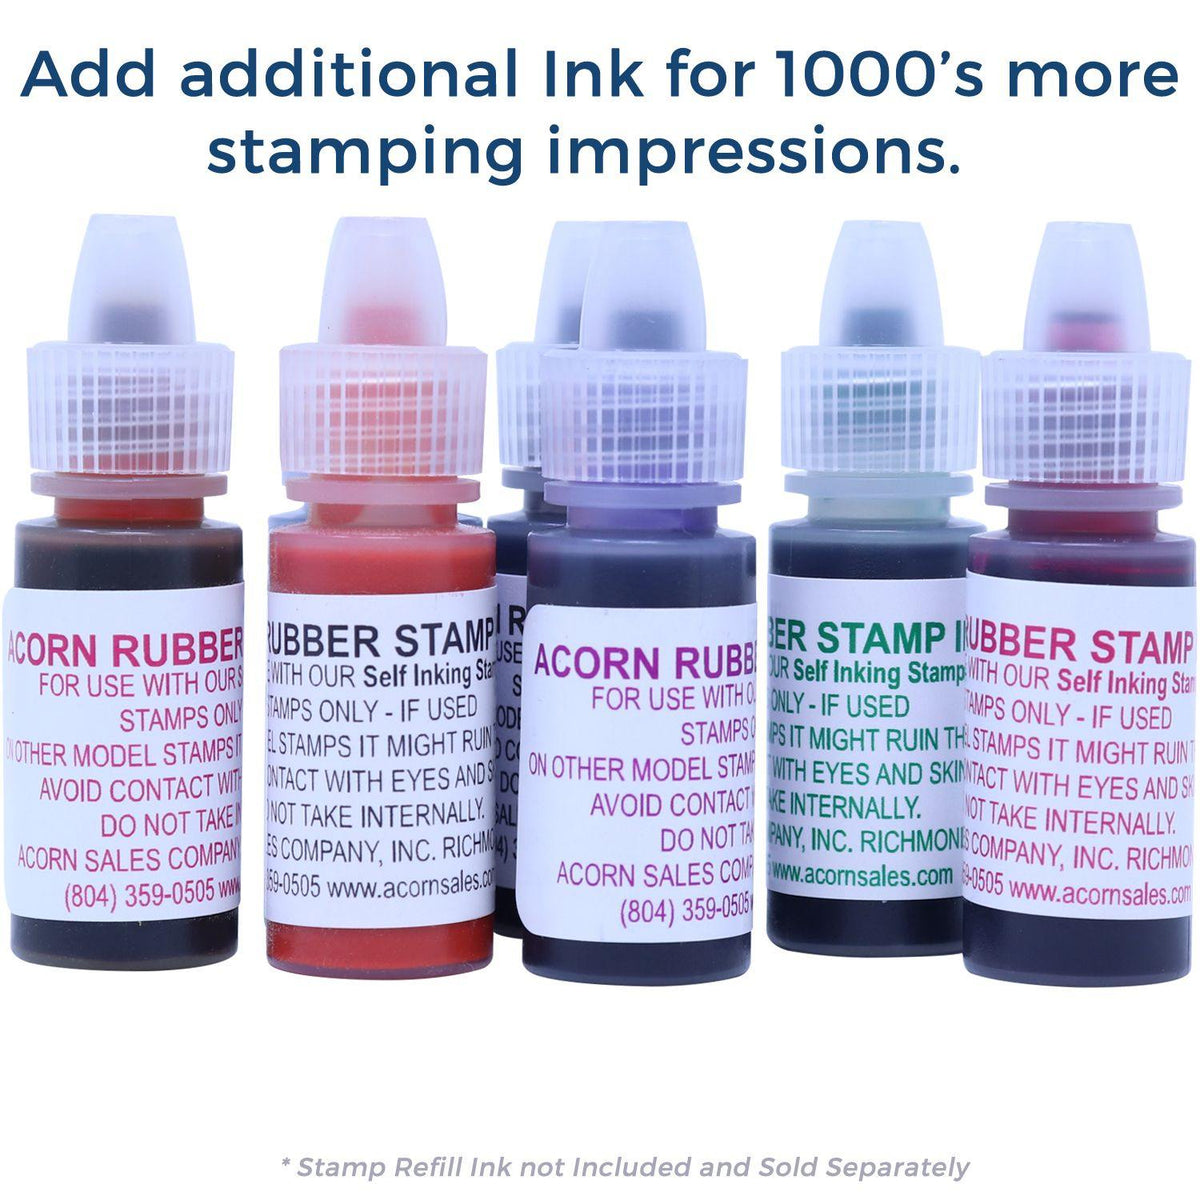 Refill Inks for Large Pre-Inked Mailed with Date Line Stamp Available